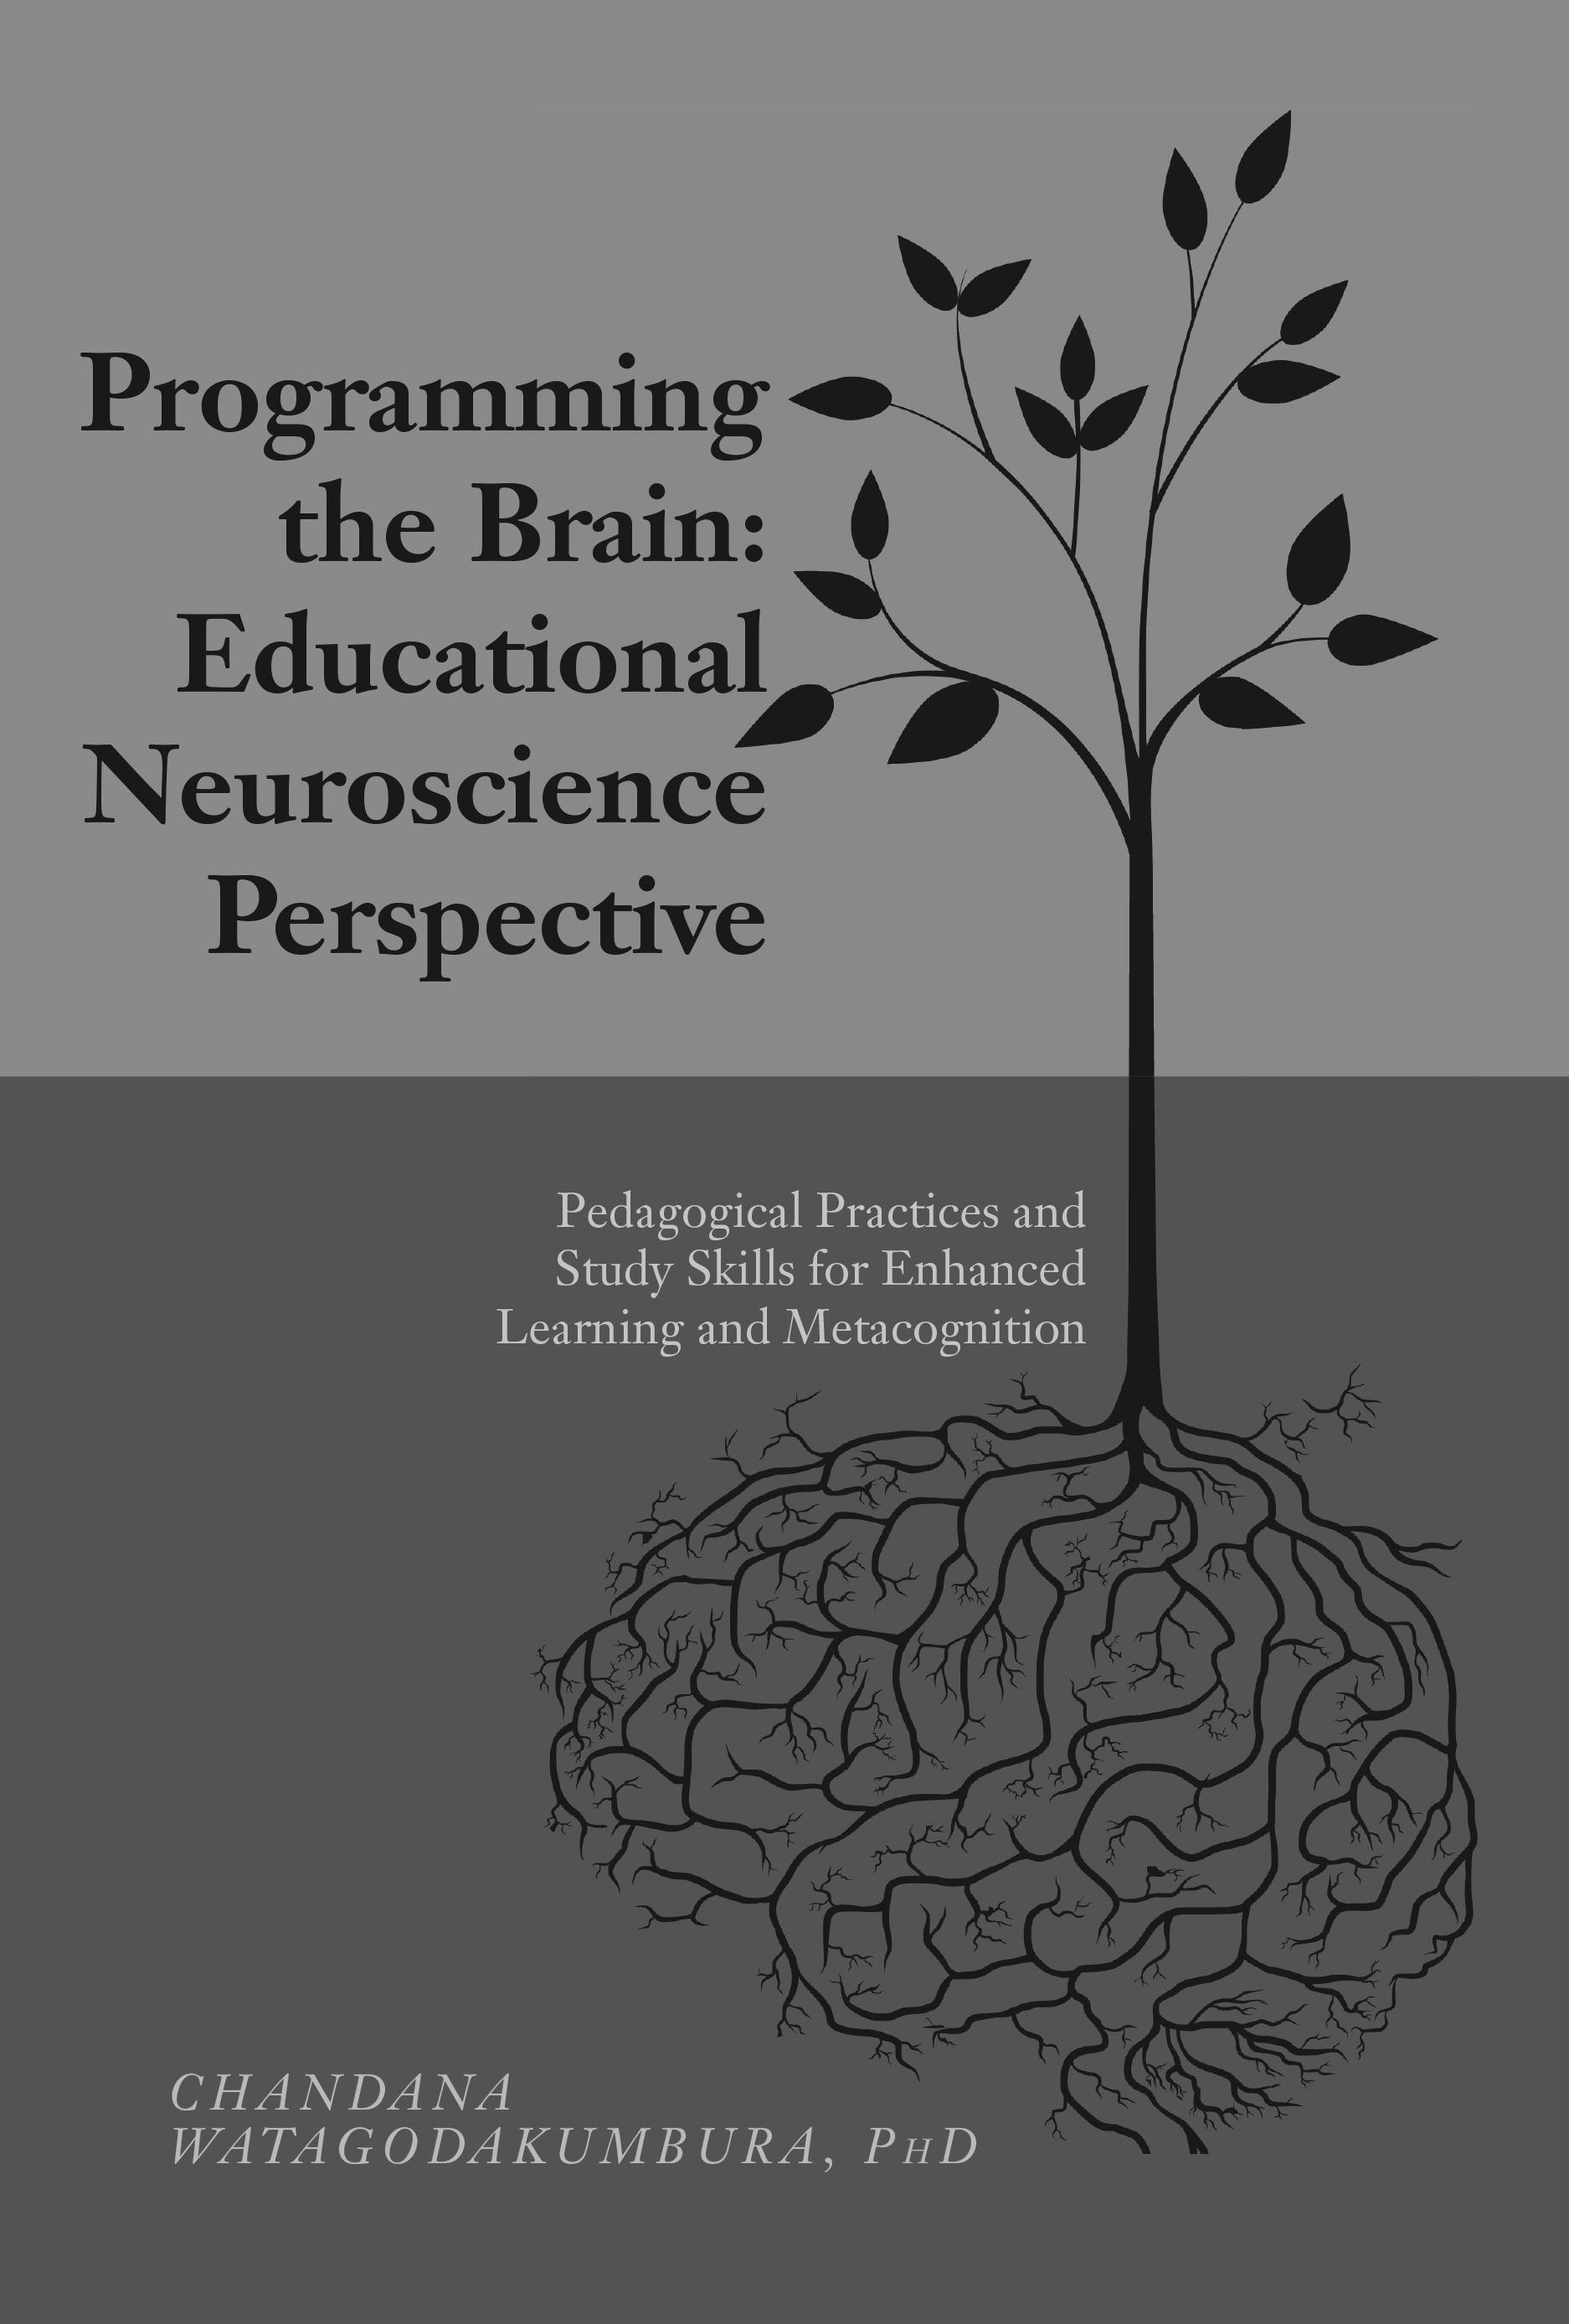 Programming the Brain: Educational Neuroscience Perspective – Pedagogical Practices and Study Skills for Enhanced Learning and Metacognition